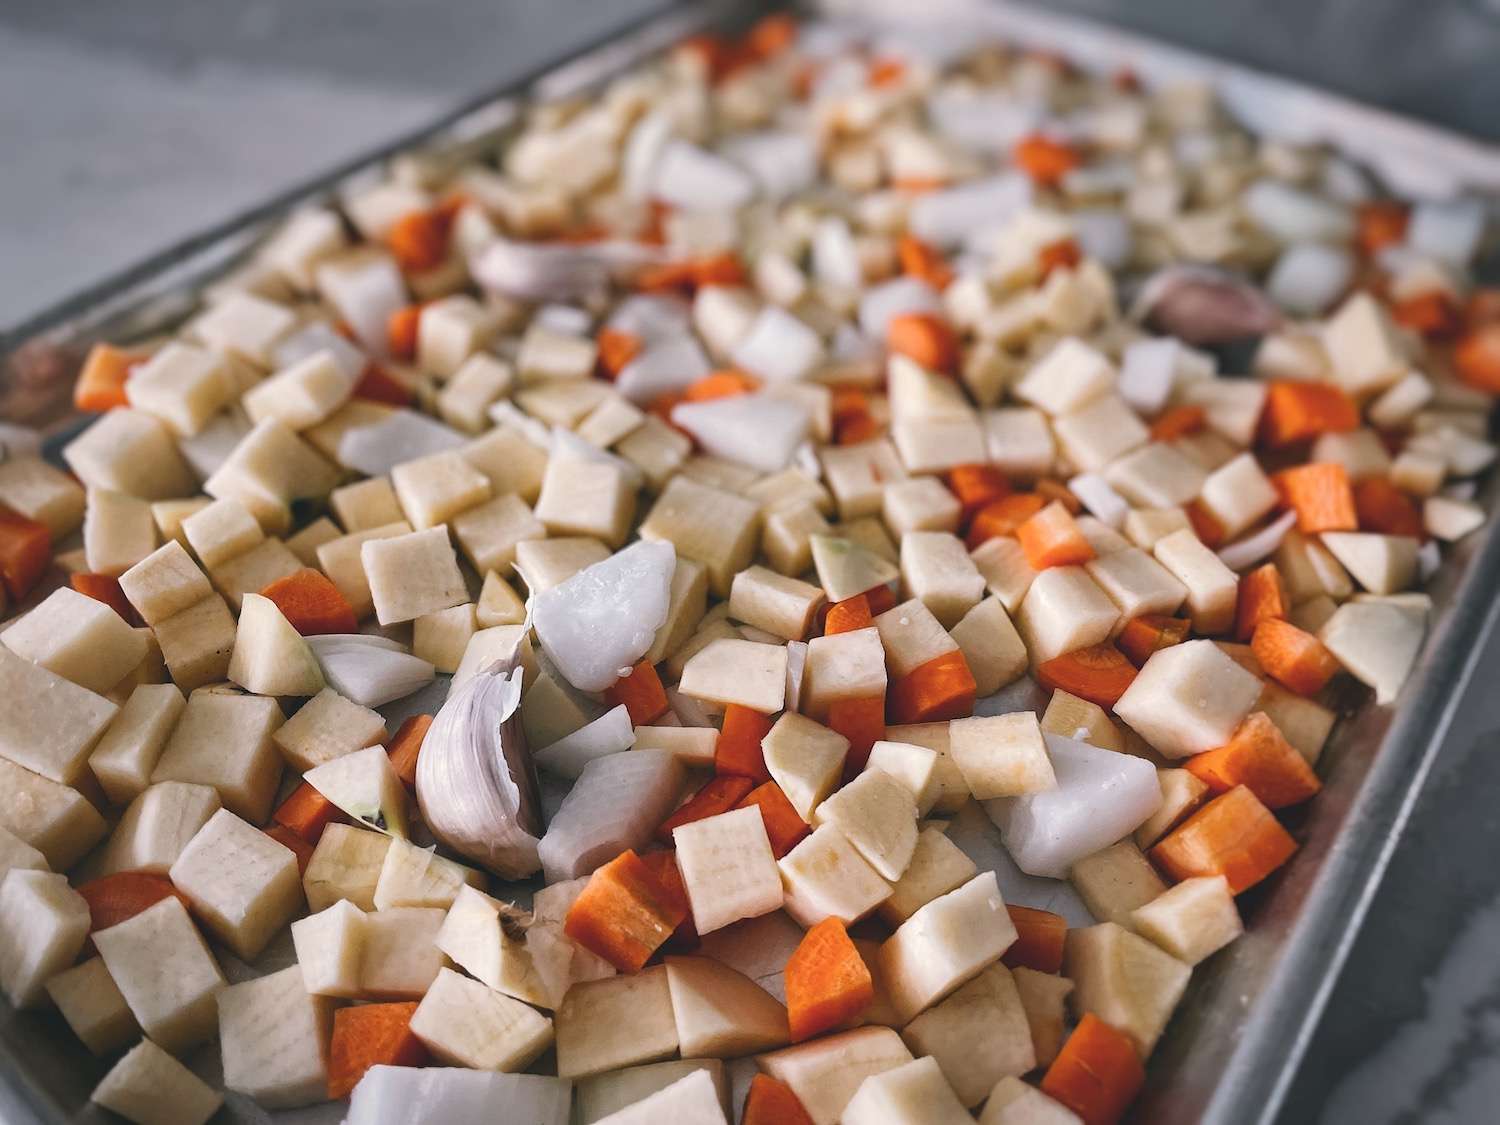 Chopped swede, onions, and carrots on a sheet pan along with garlic cloves and coconut oil.